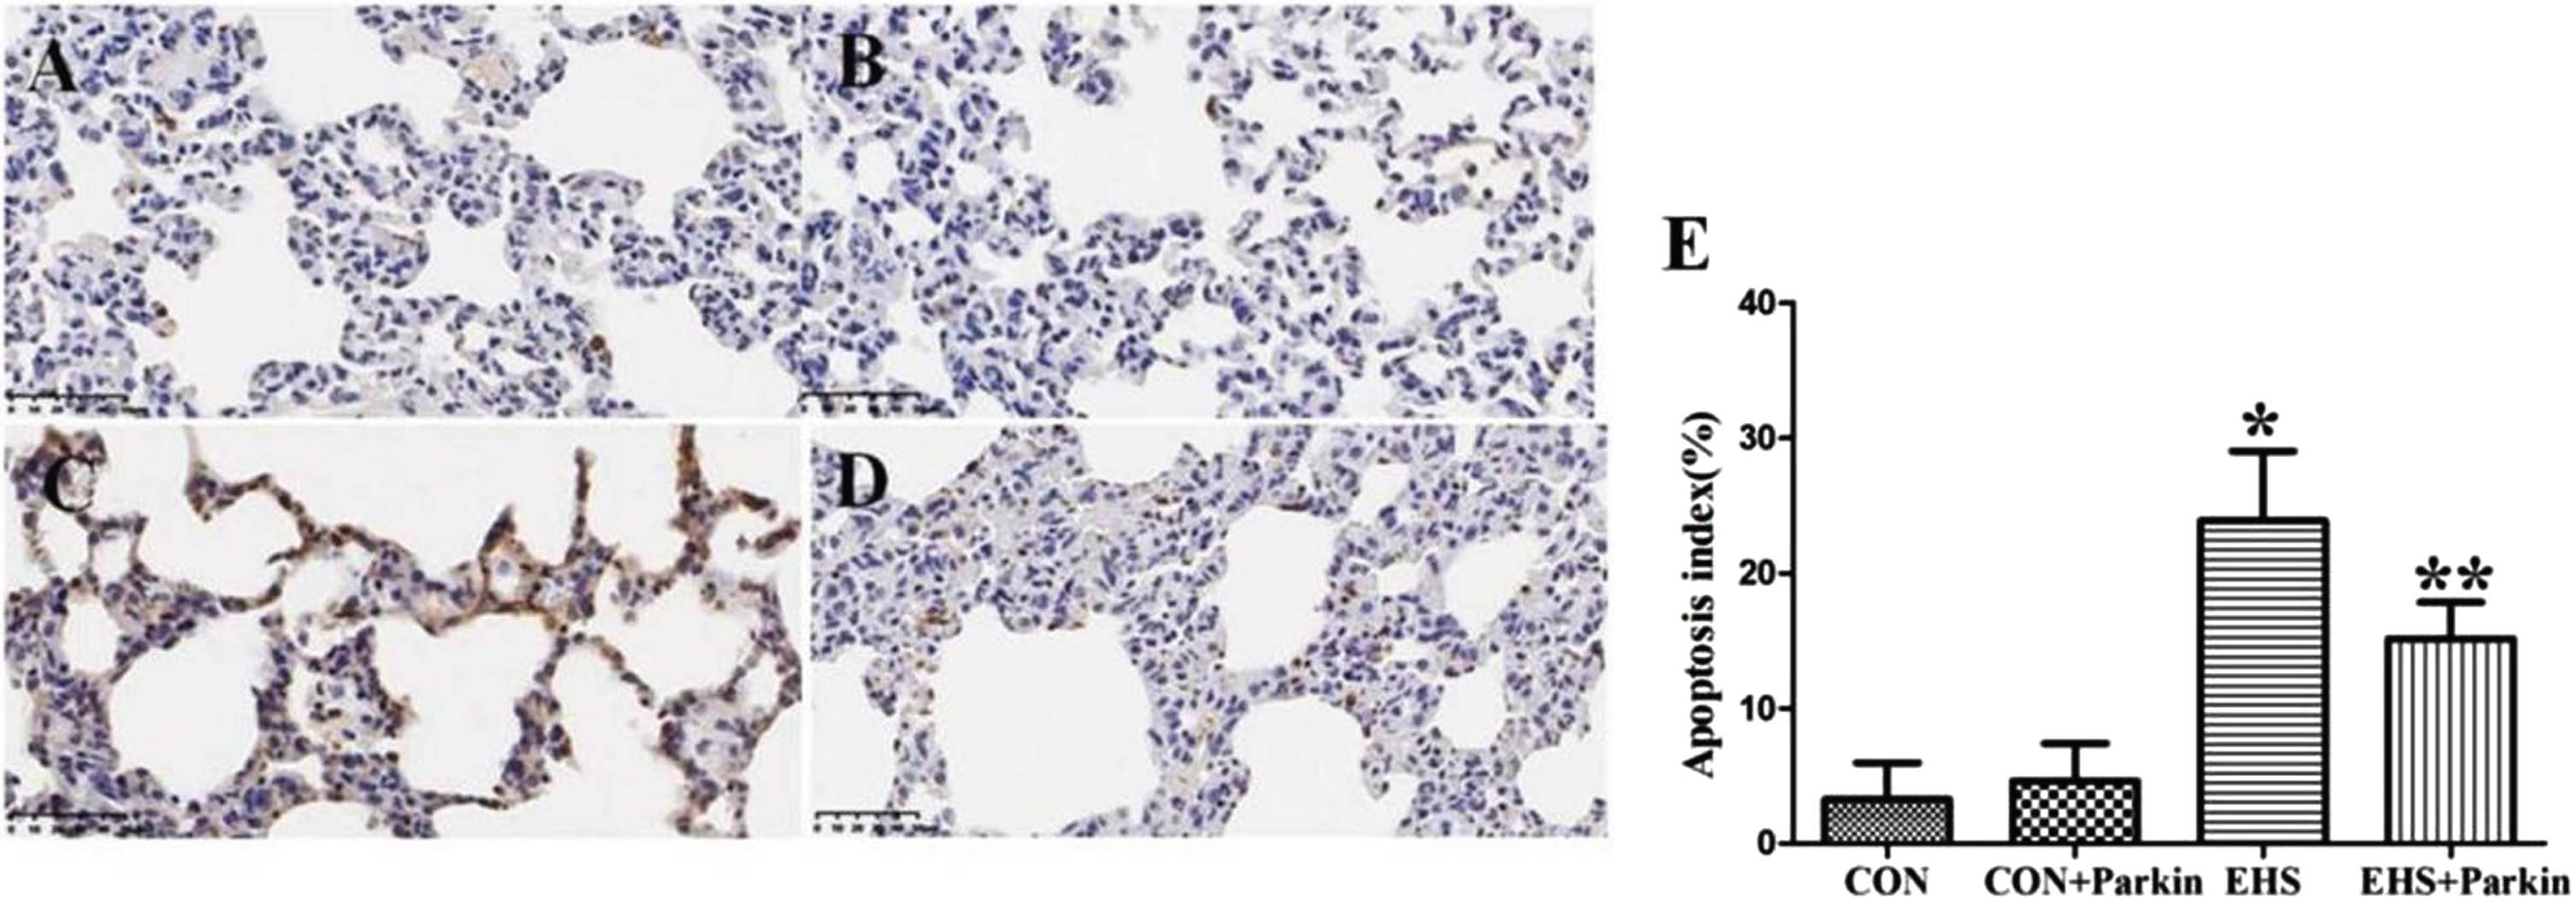 Pulmonary apoptosis was attenuated to a greater extent in the EHS + Parkin group (N = 5). A: CON group; B: CON + Parkin group; C: EHS group; D: EHS + Parkin group. E: Apoptosis index. *P < 0.05 vs Control group; **P < 0.05 vs EHS group.